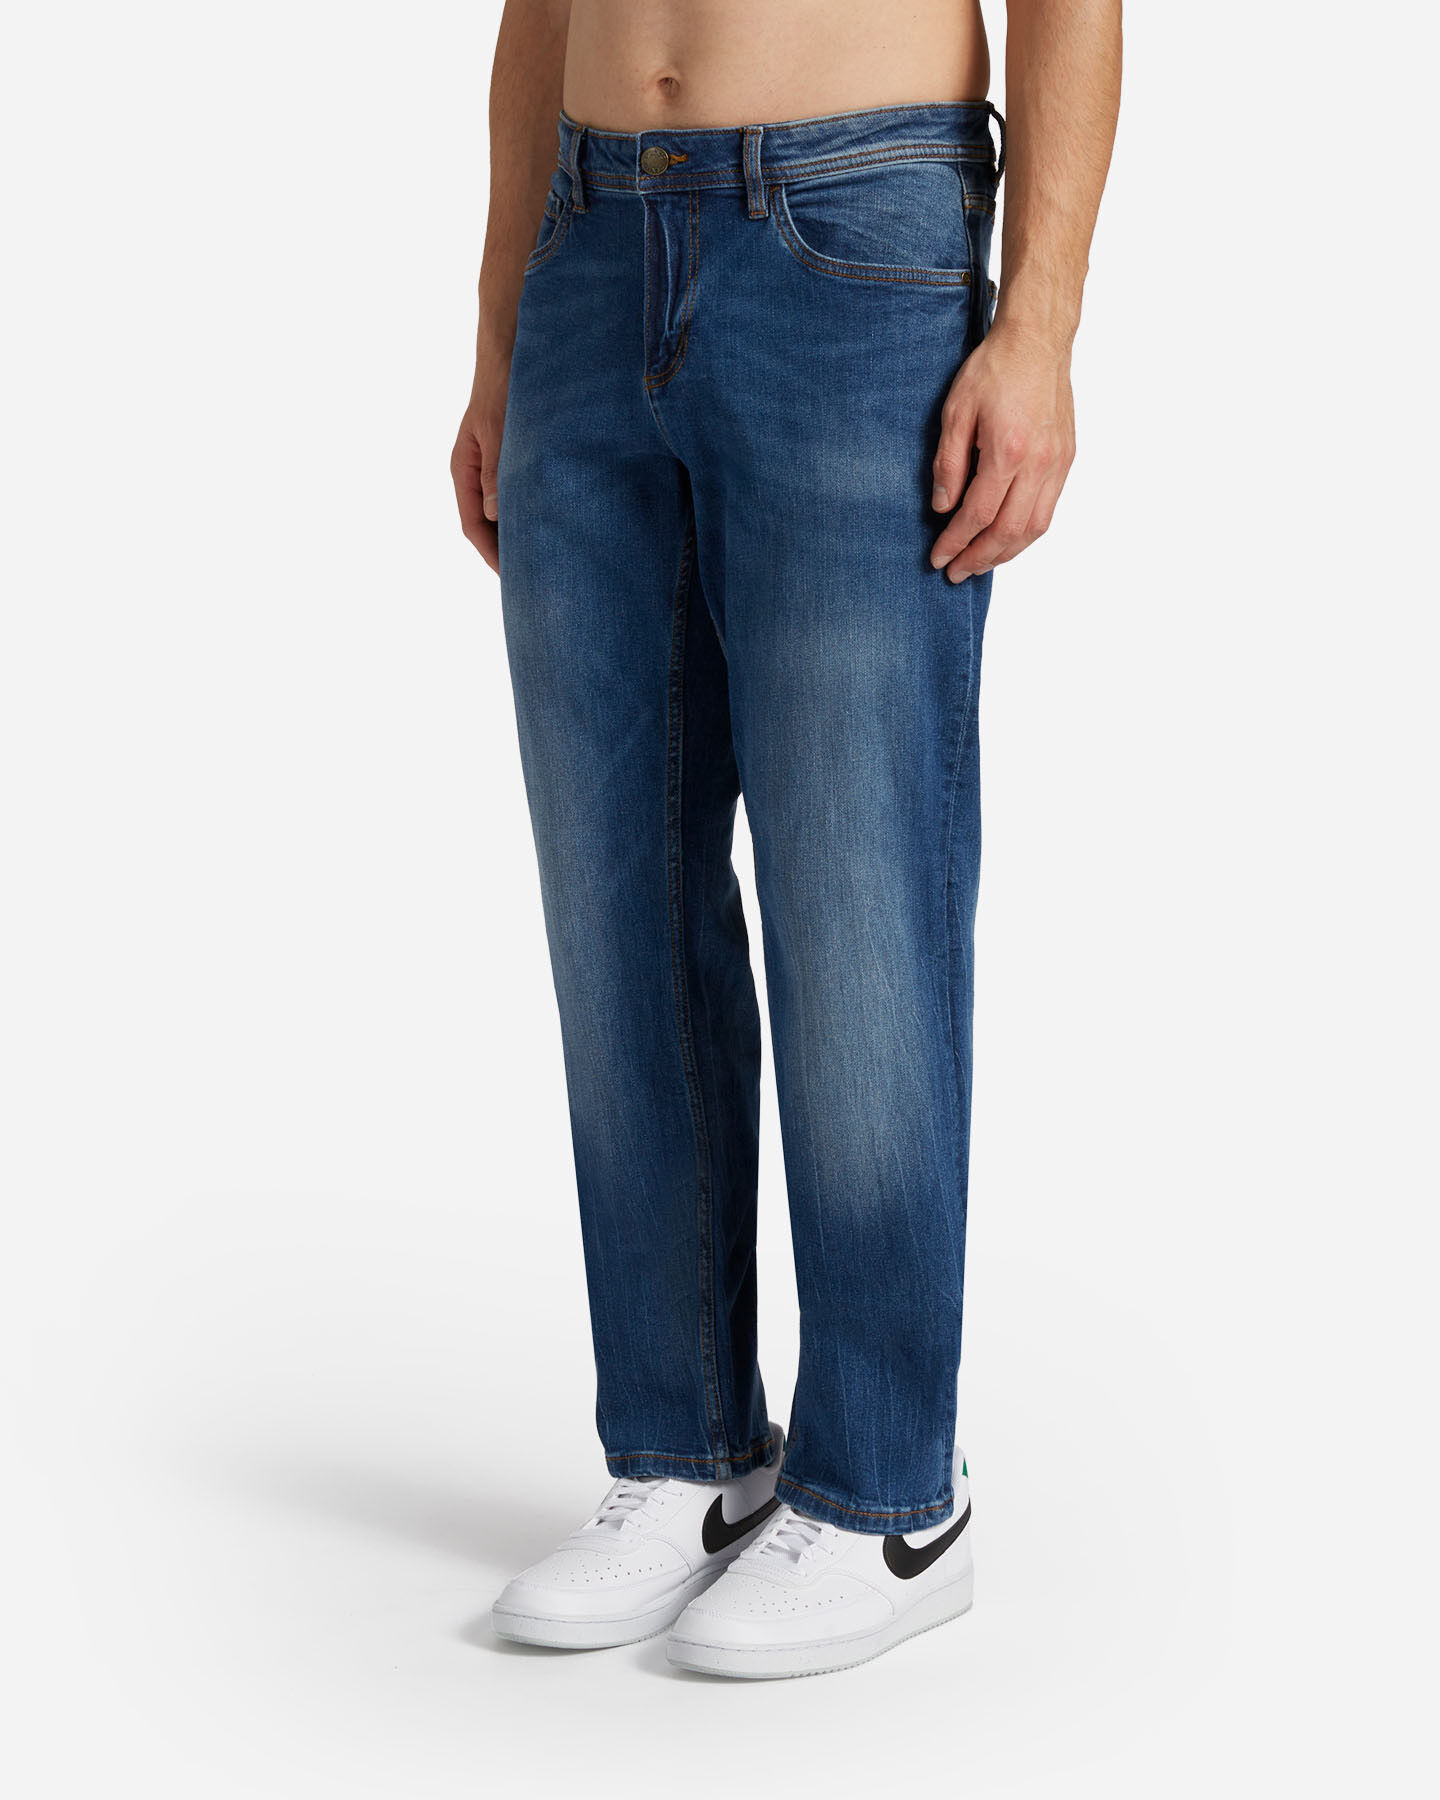  Jeans DACK'S ESSENTIAL M S4129649|MD|46 scatto 2